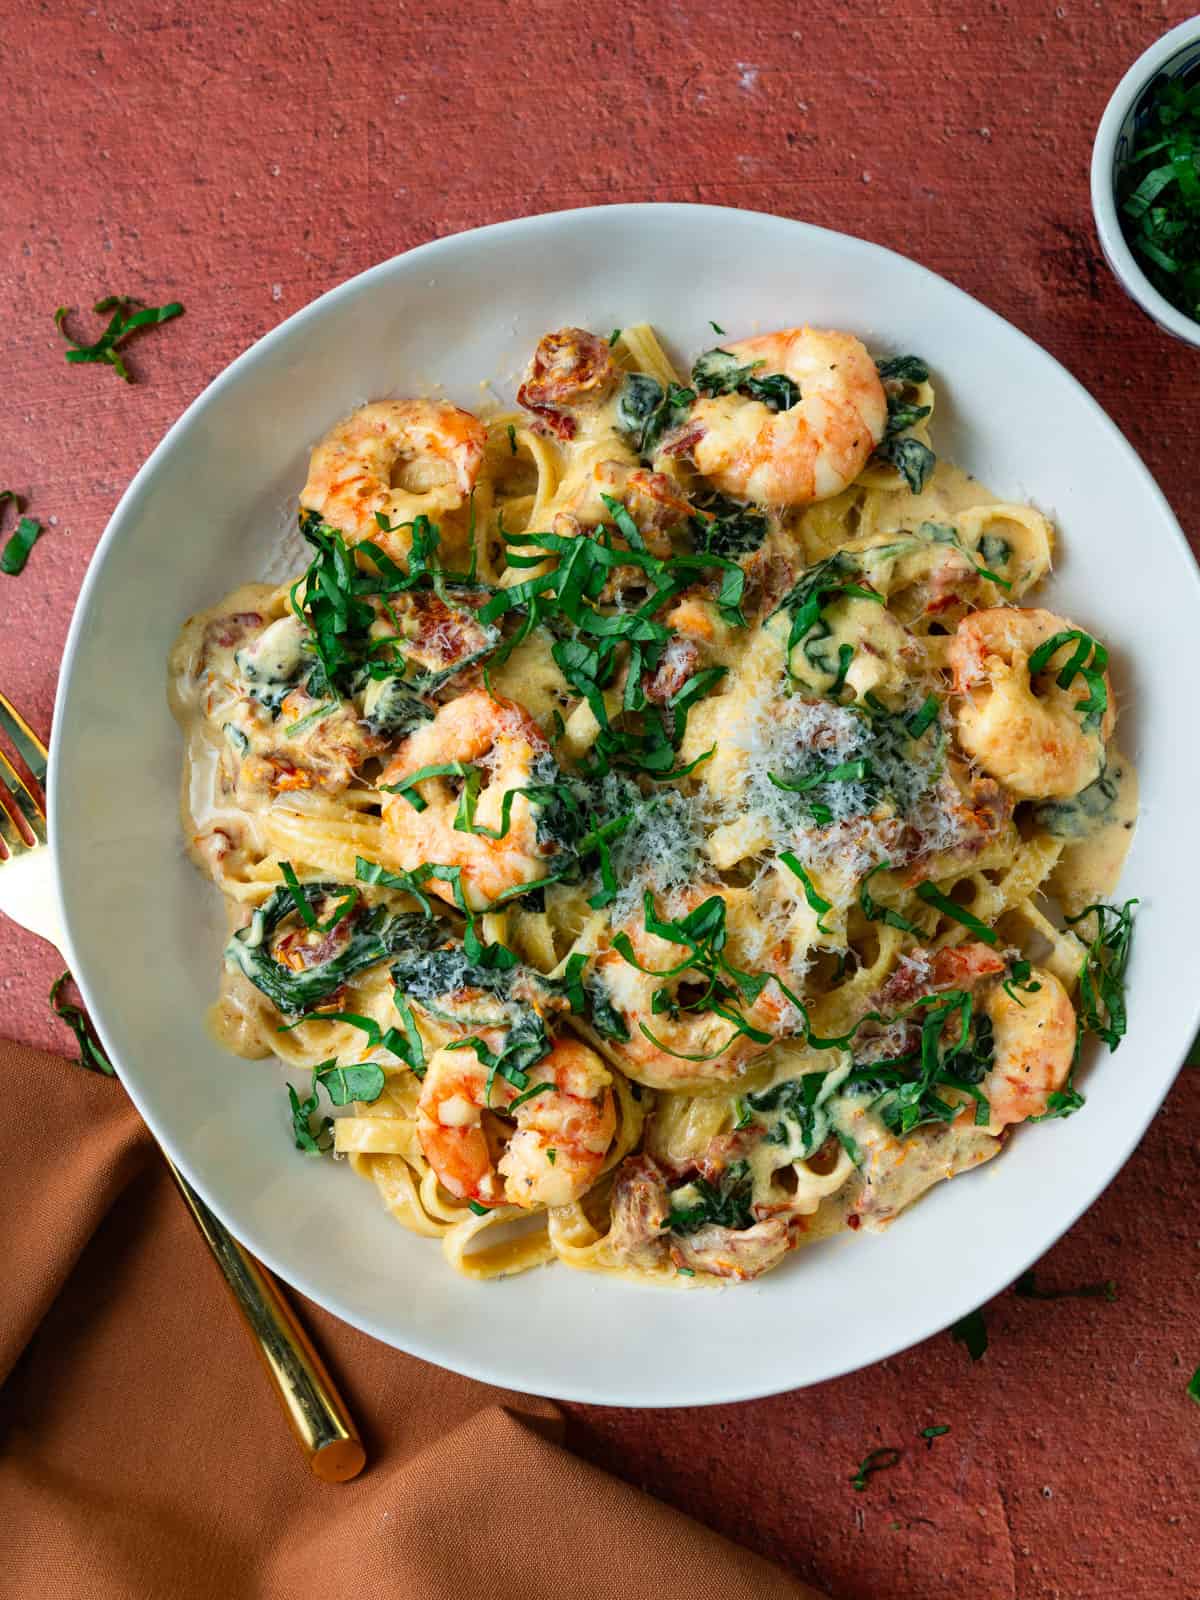 Tuscan shrimp pasta with sundried tomatoes and spinach.